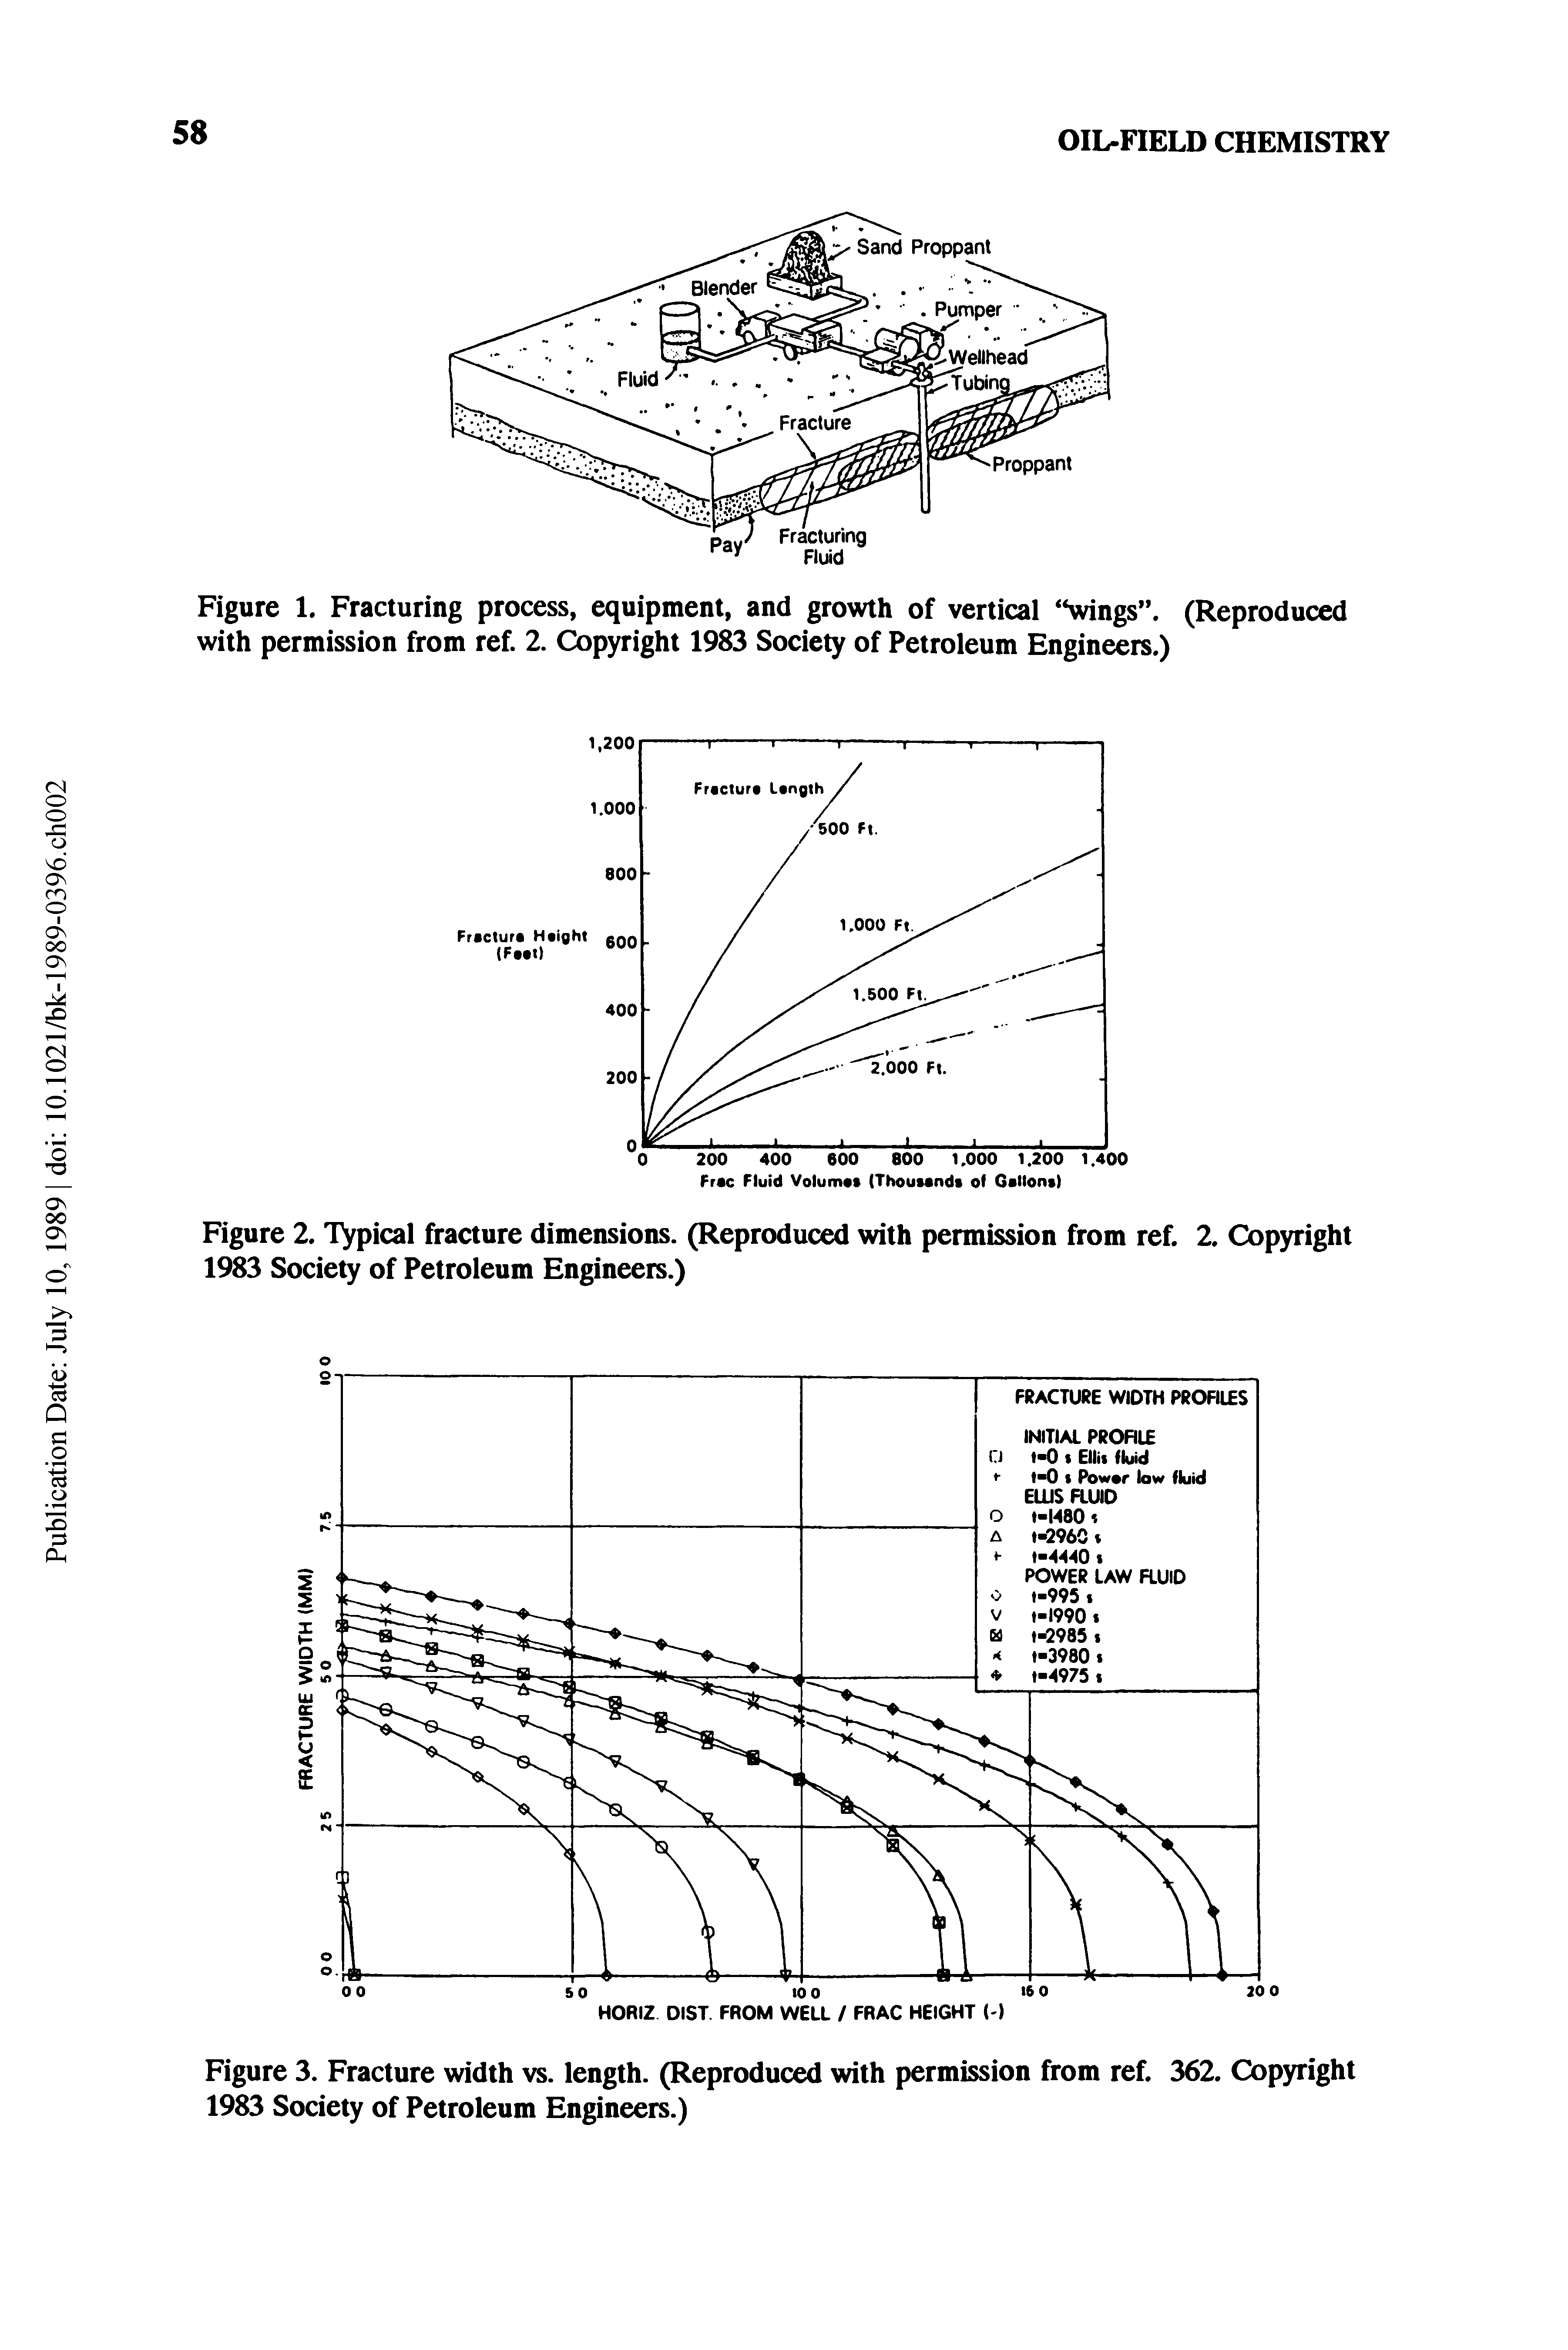 Figure 2. Typical fracture dimensions. (Reproduced with permission from ref. 2. Copyright 1983 Society of Petroleum Engineers.)...